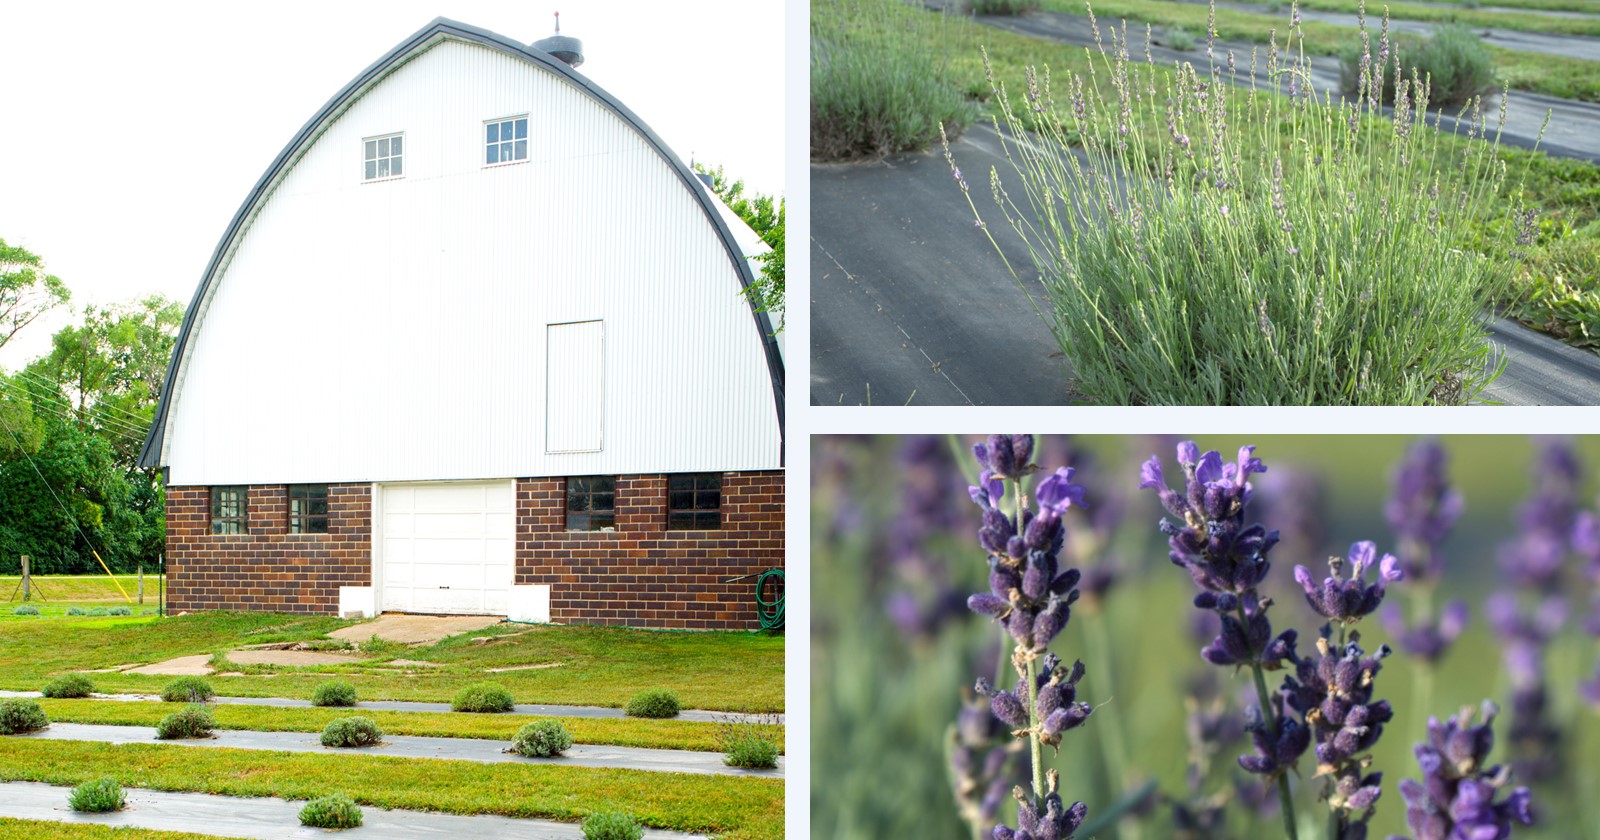 The Lavender Barnyard farm in Farmington, Minnesota. Left: The barn in the yard with rows of lavender plants that have been harvested. Top right: Lavender plant waiting to be harvested. Bottom right: Lavender up close.